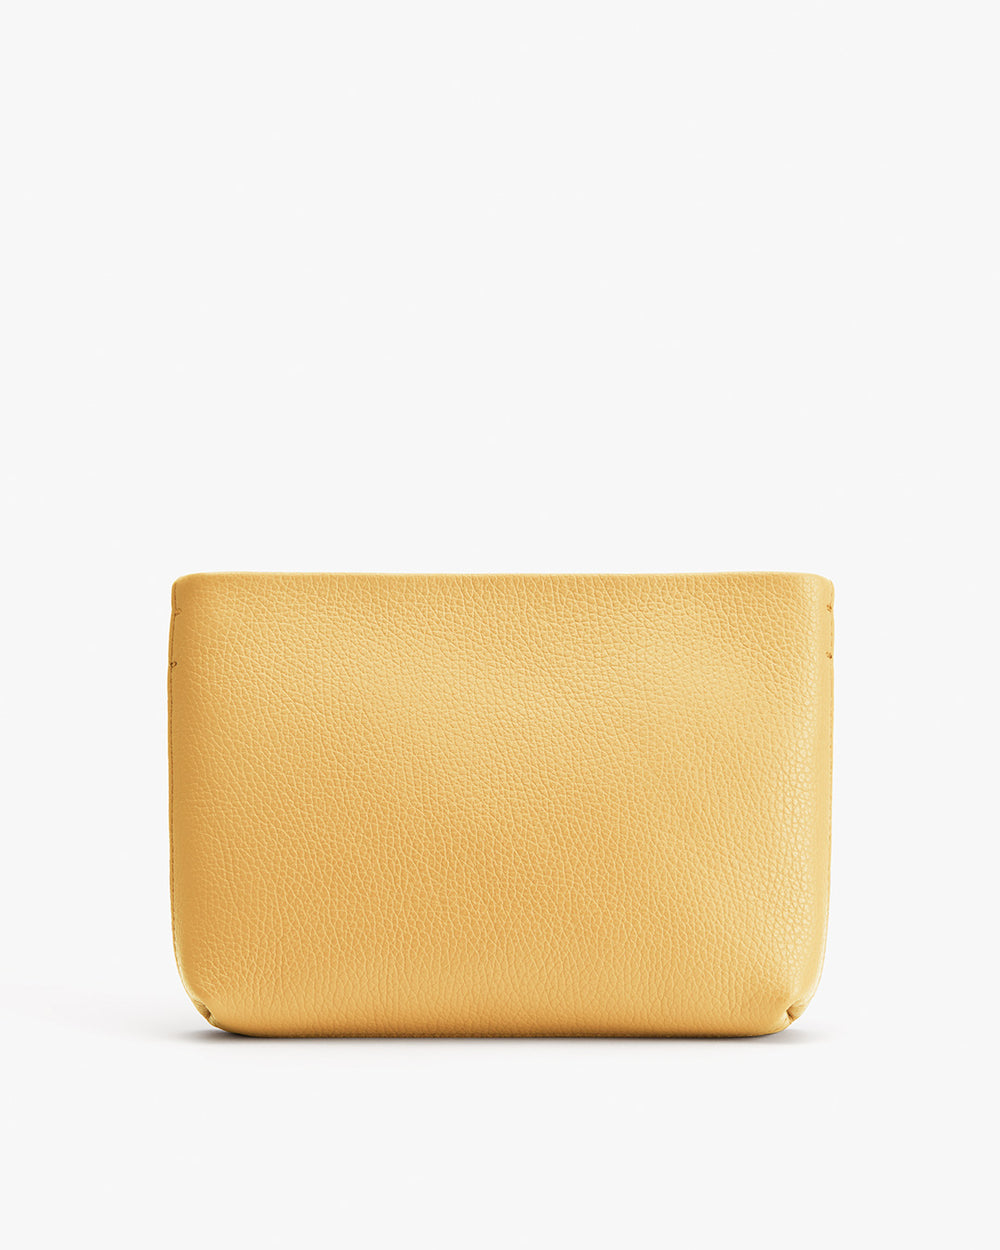 Small textured pouch standing upright on a plain background.